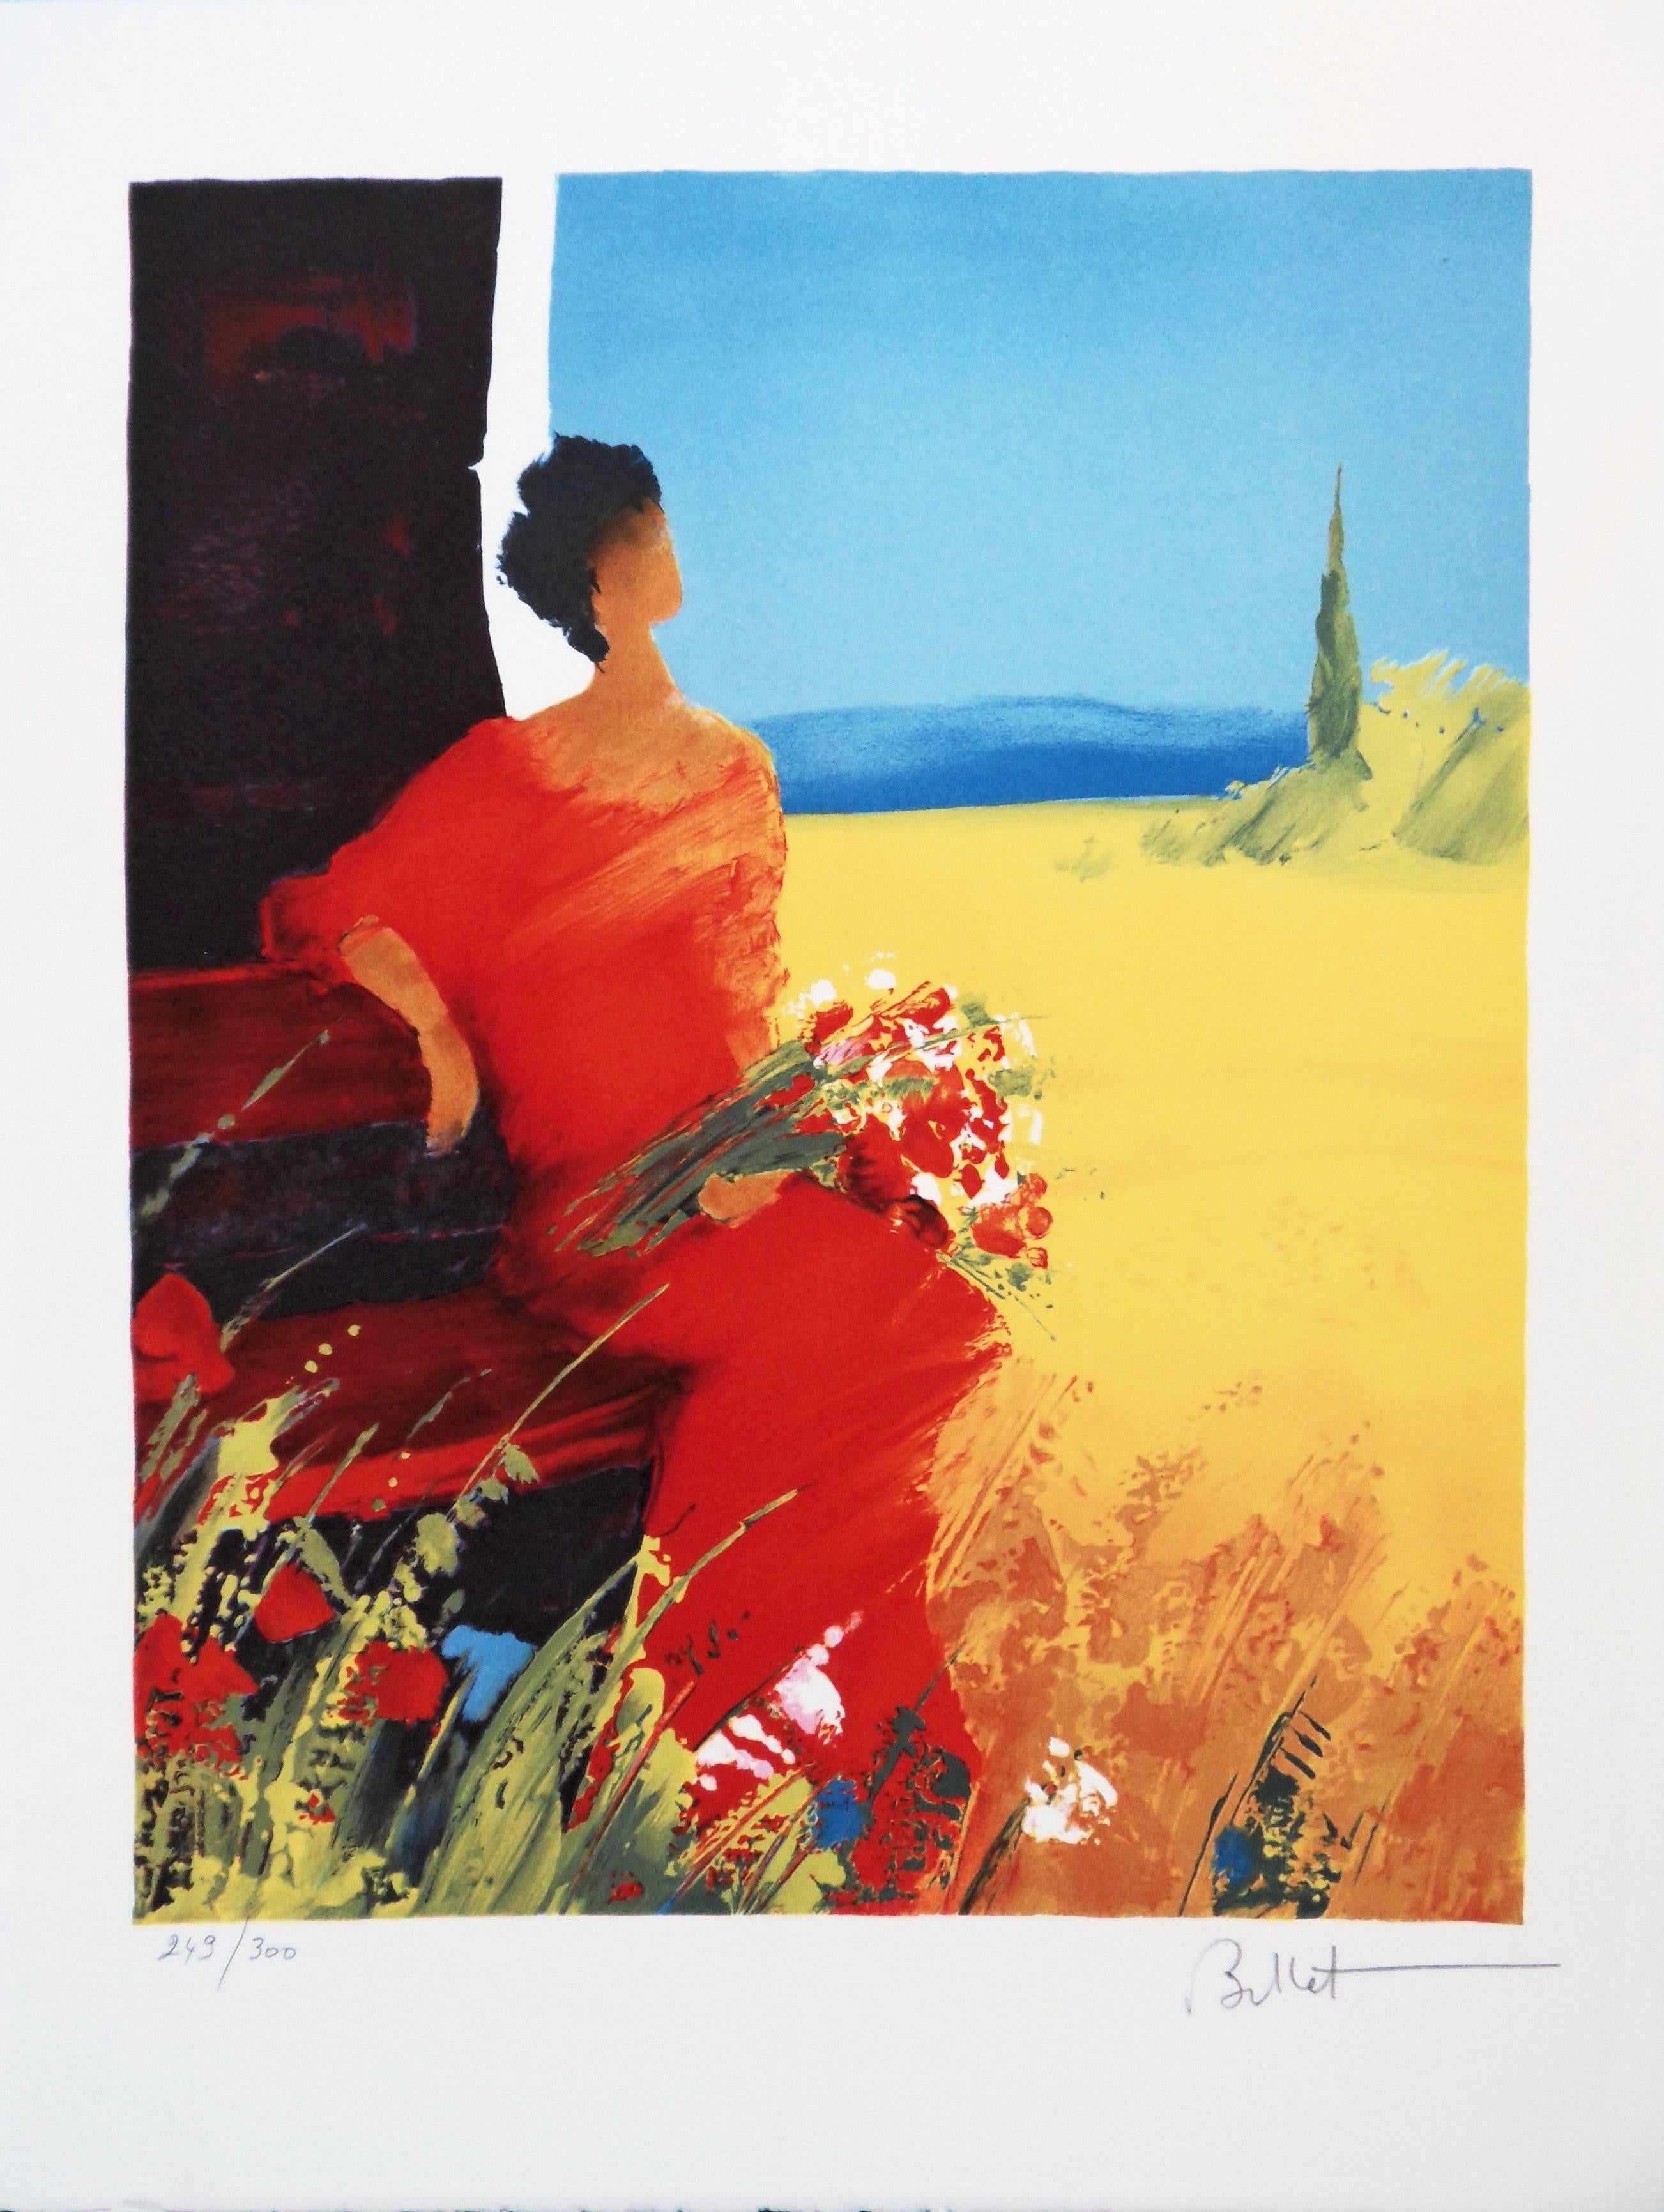 Emile Bellet Figurative Print - Woman in Red with Bouquet of Wild Flowers - Handsigned lithograph